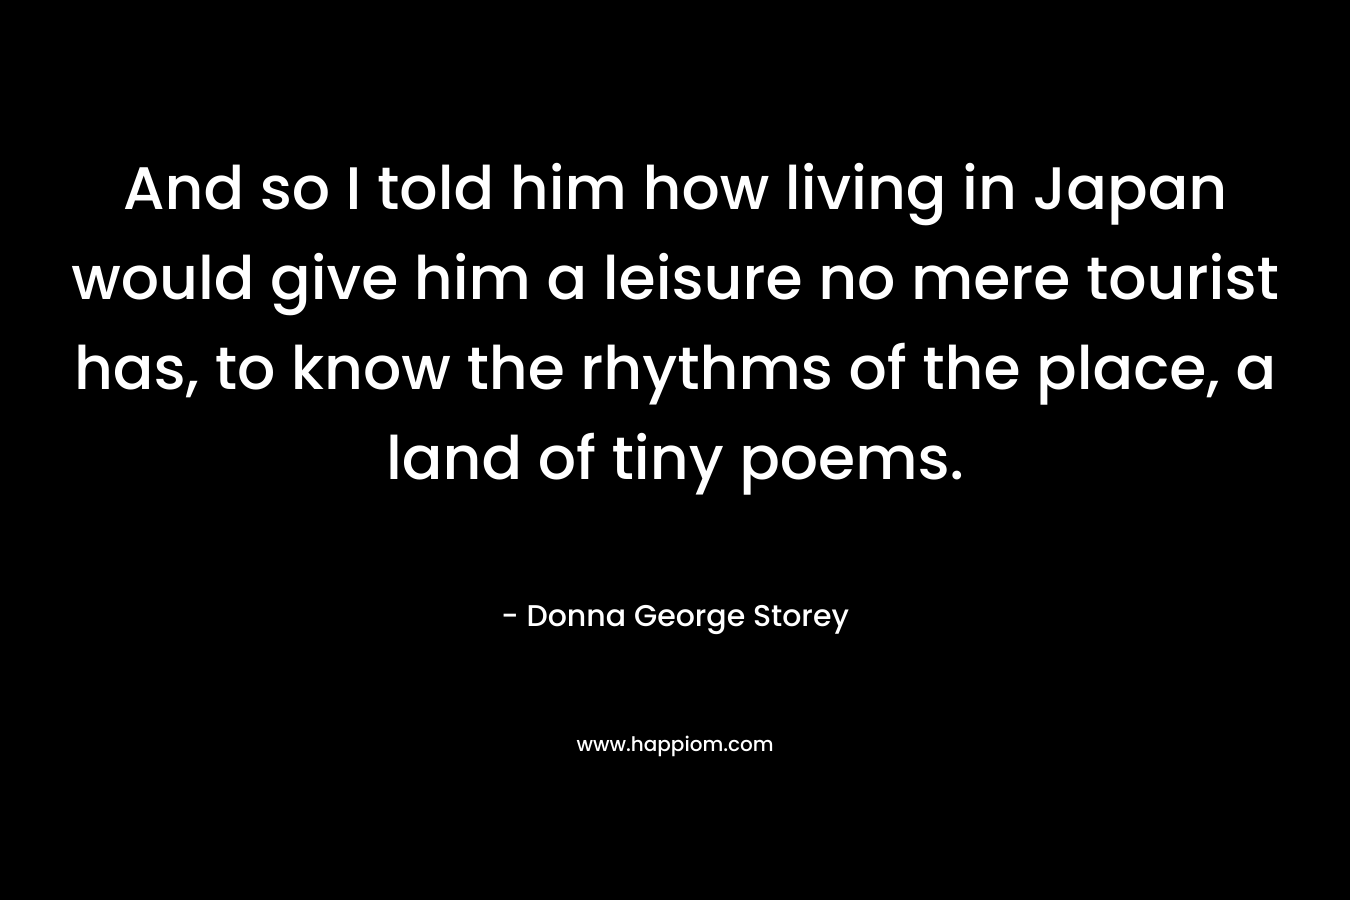 And so I told him how living in Japan would give him a leisure no mere tourist has, to know the rhythms of the place, a land of tiny poems. – Donna George Storey